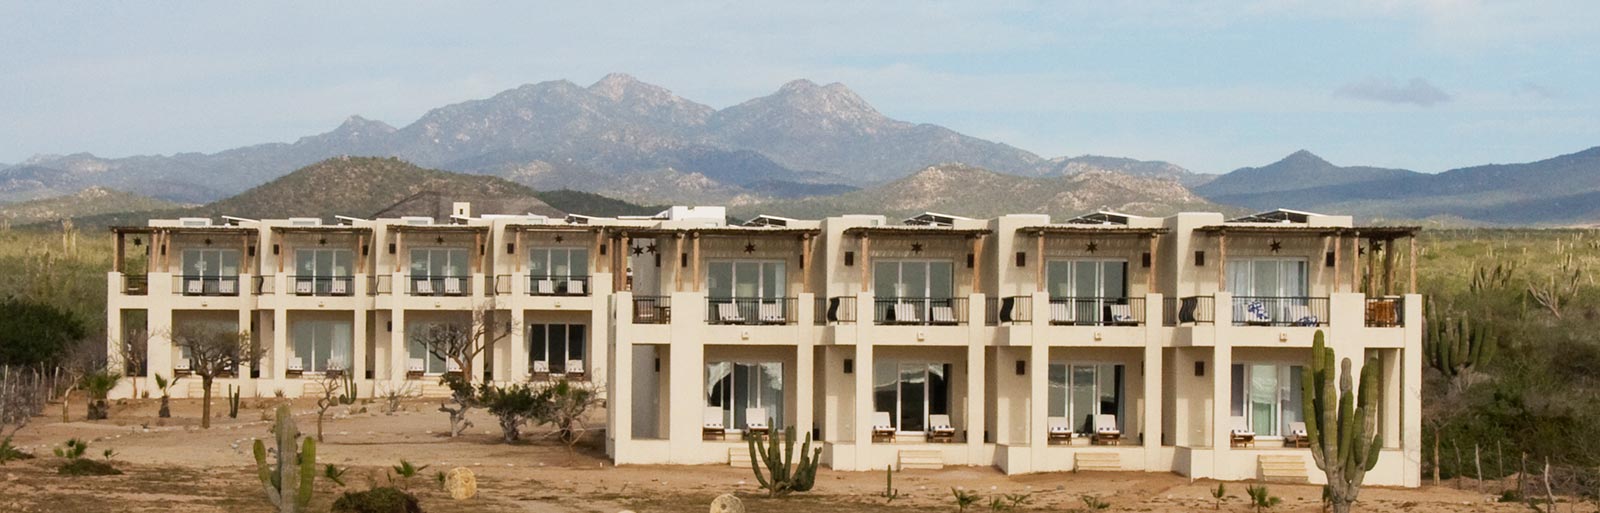 Prana Del Mar: An Eco-Luxe Yoga Retreat Amidst Mountains, Sea and Sand